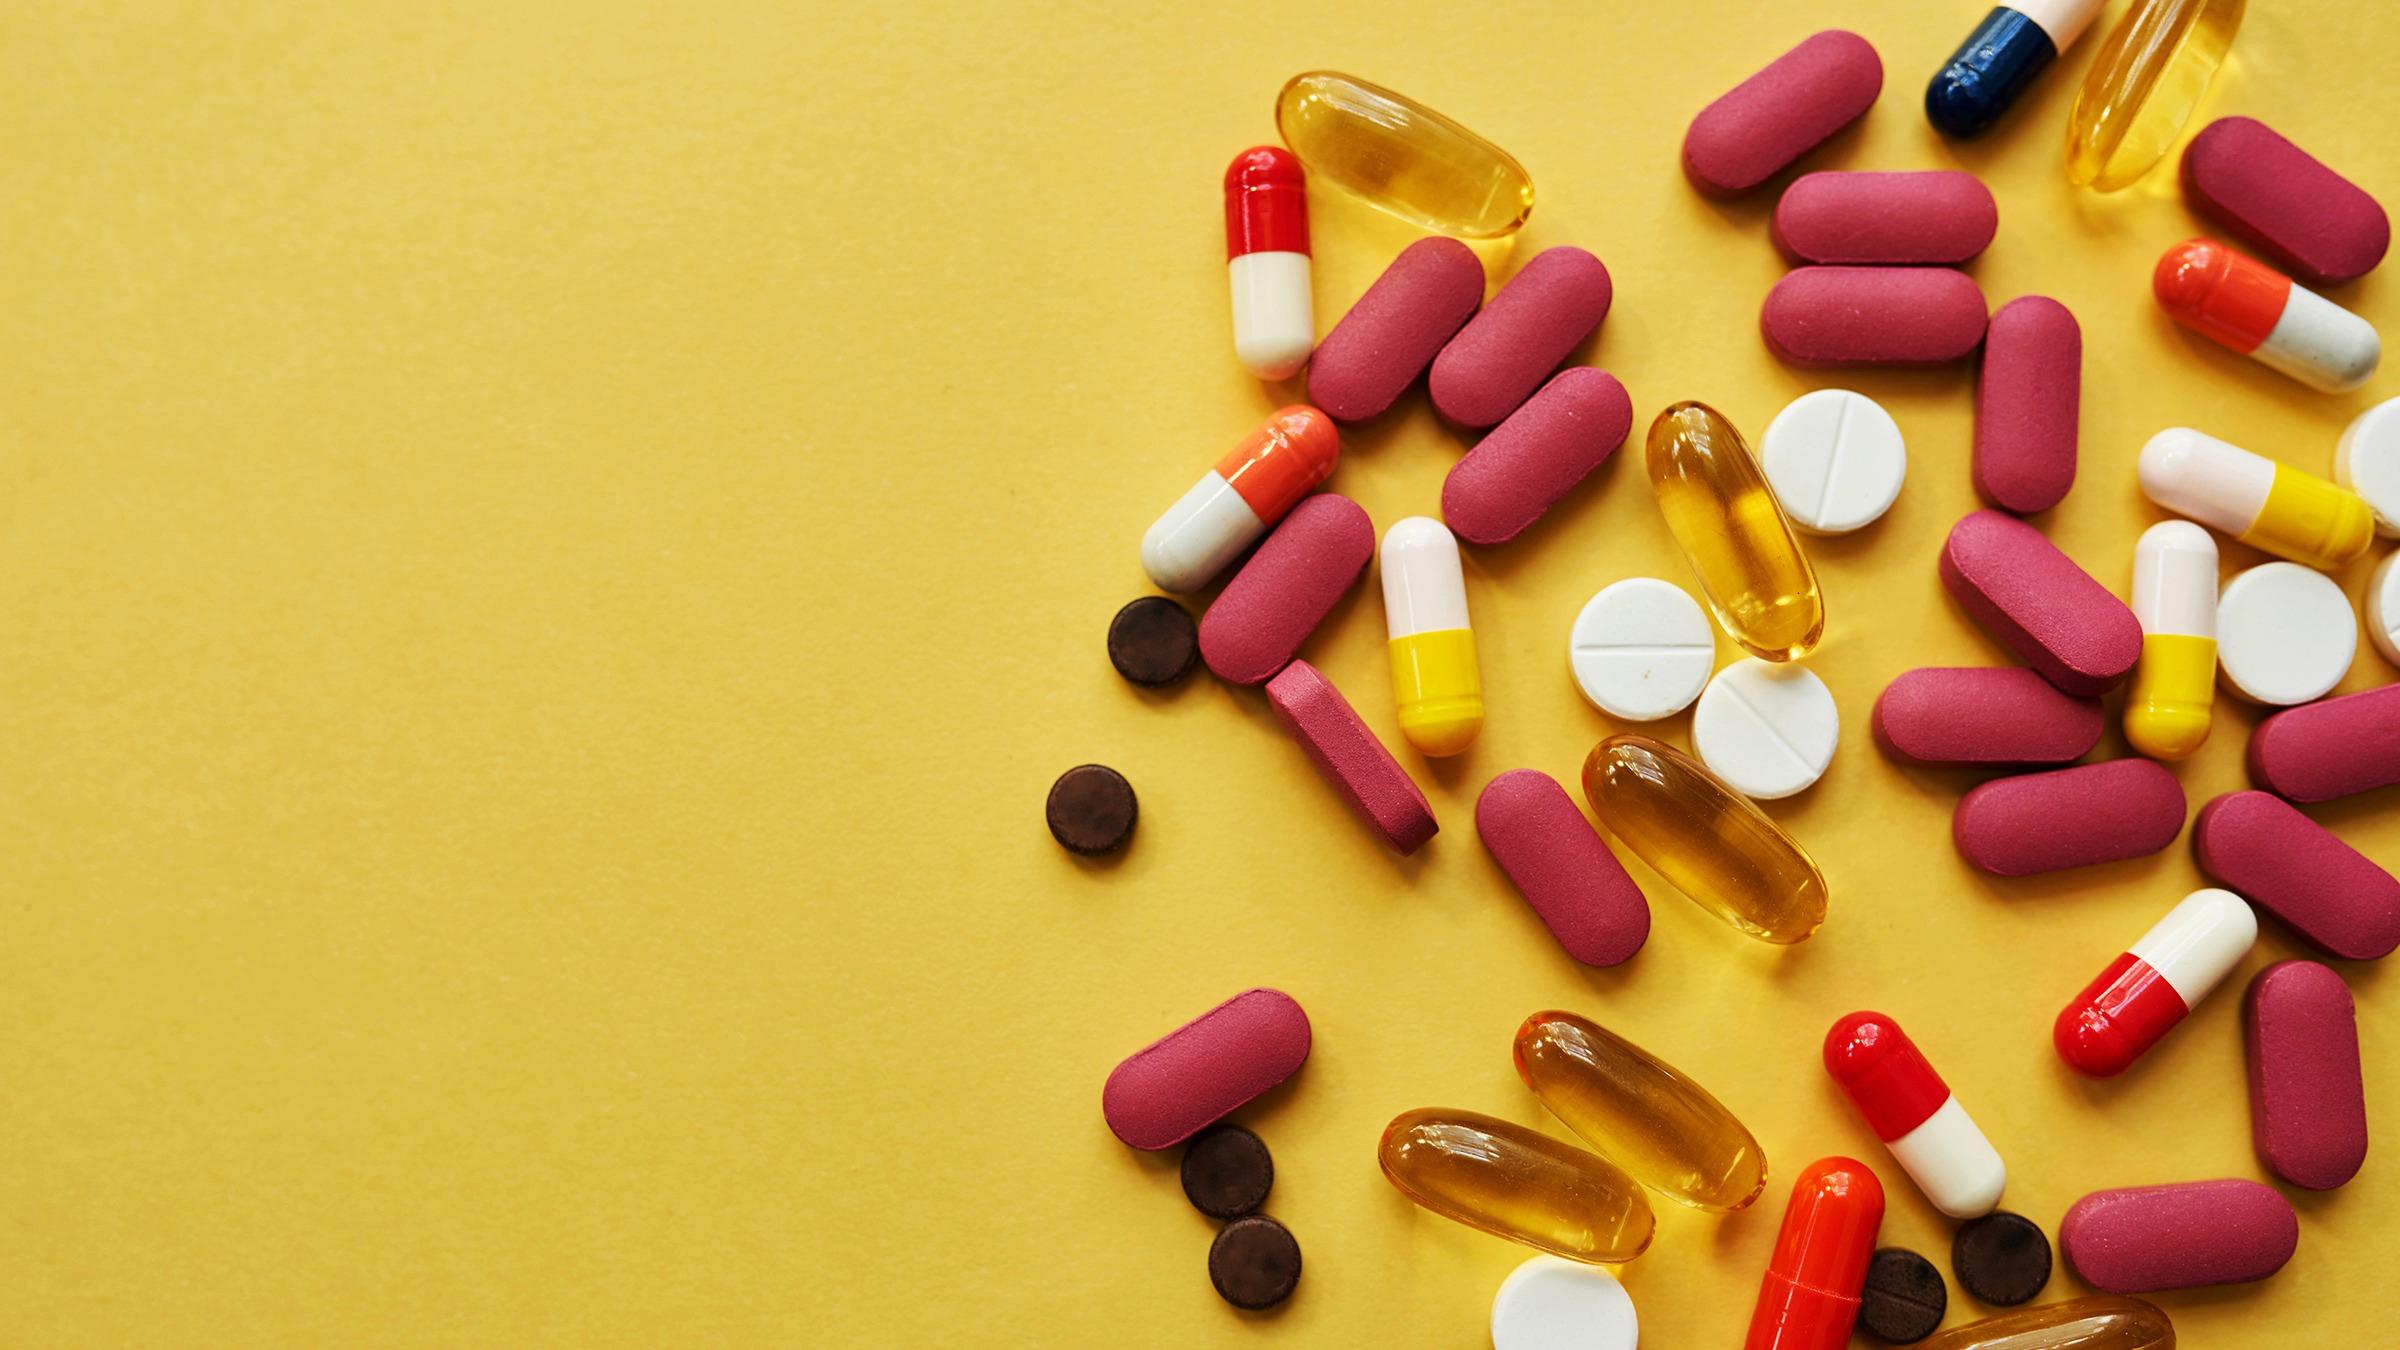 A flat lay of various pills and capsules on a yellow background.